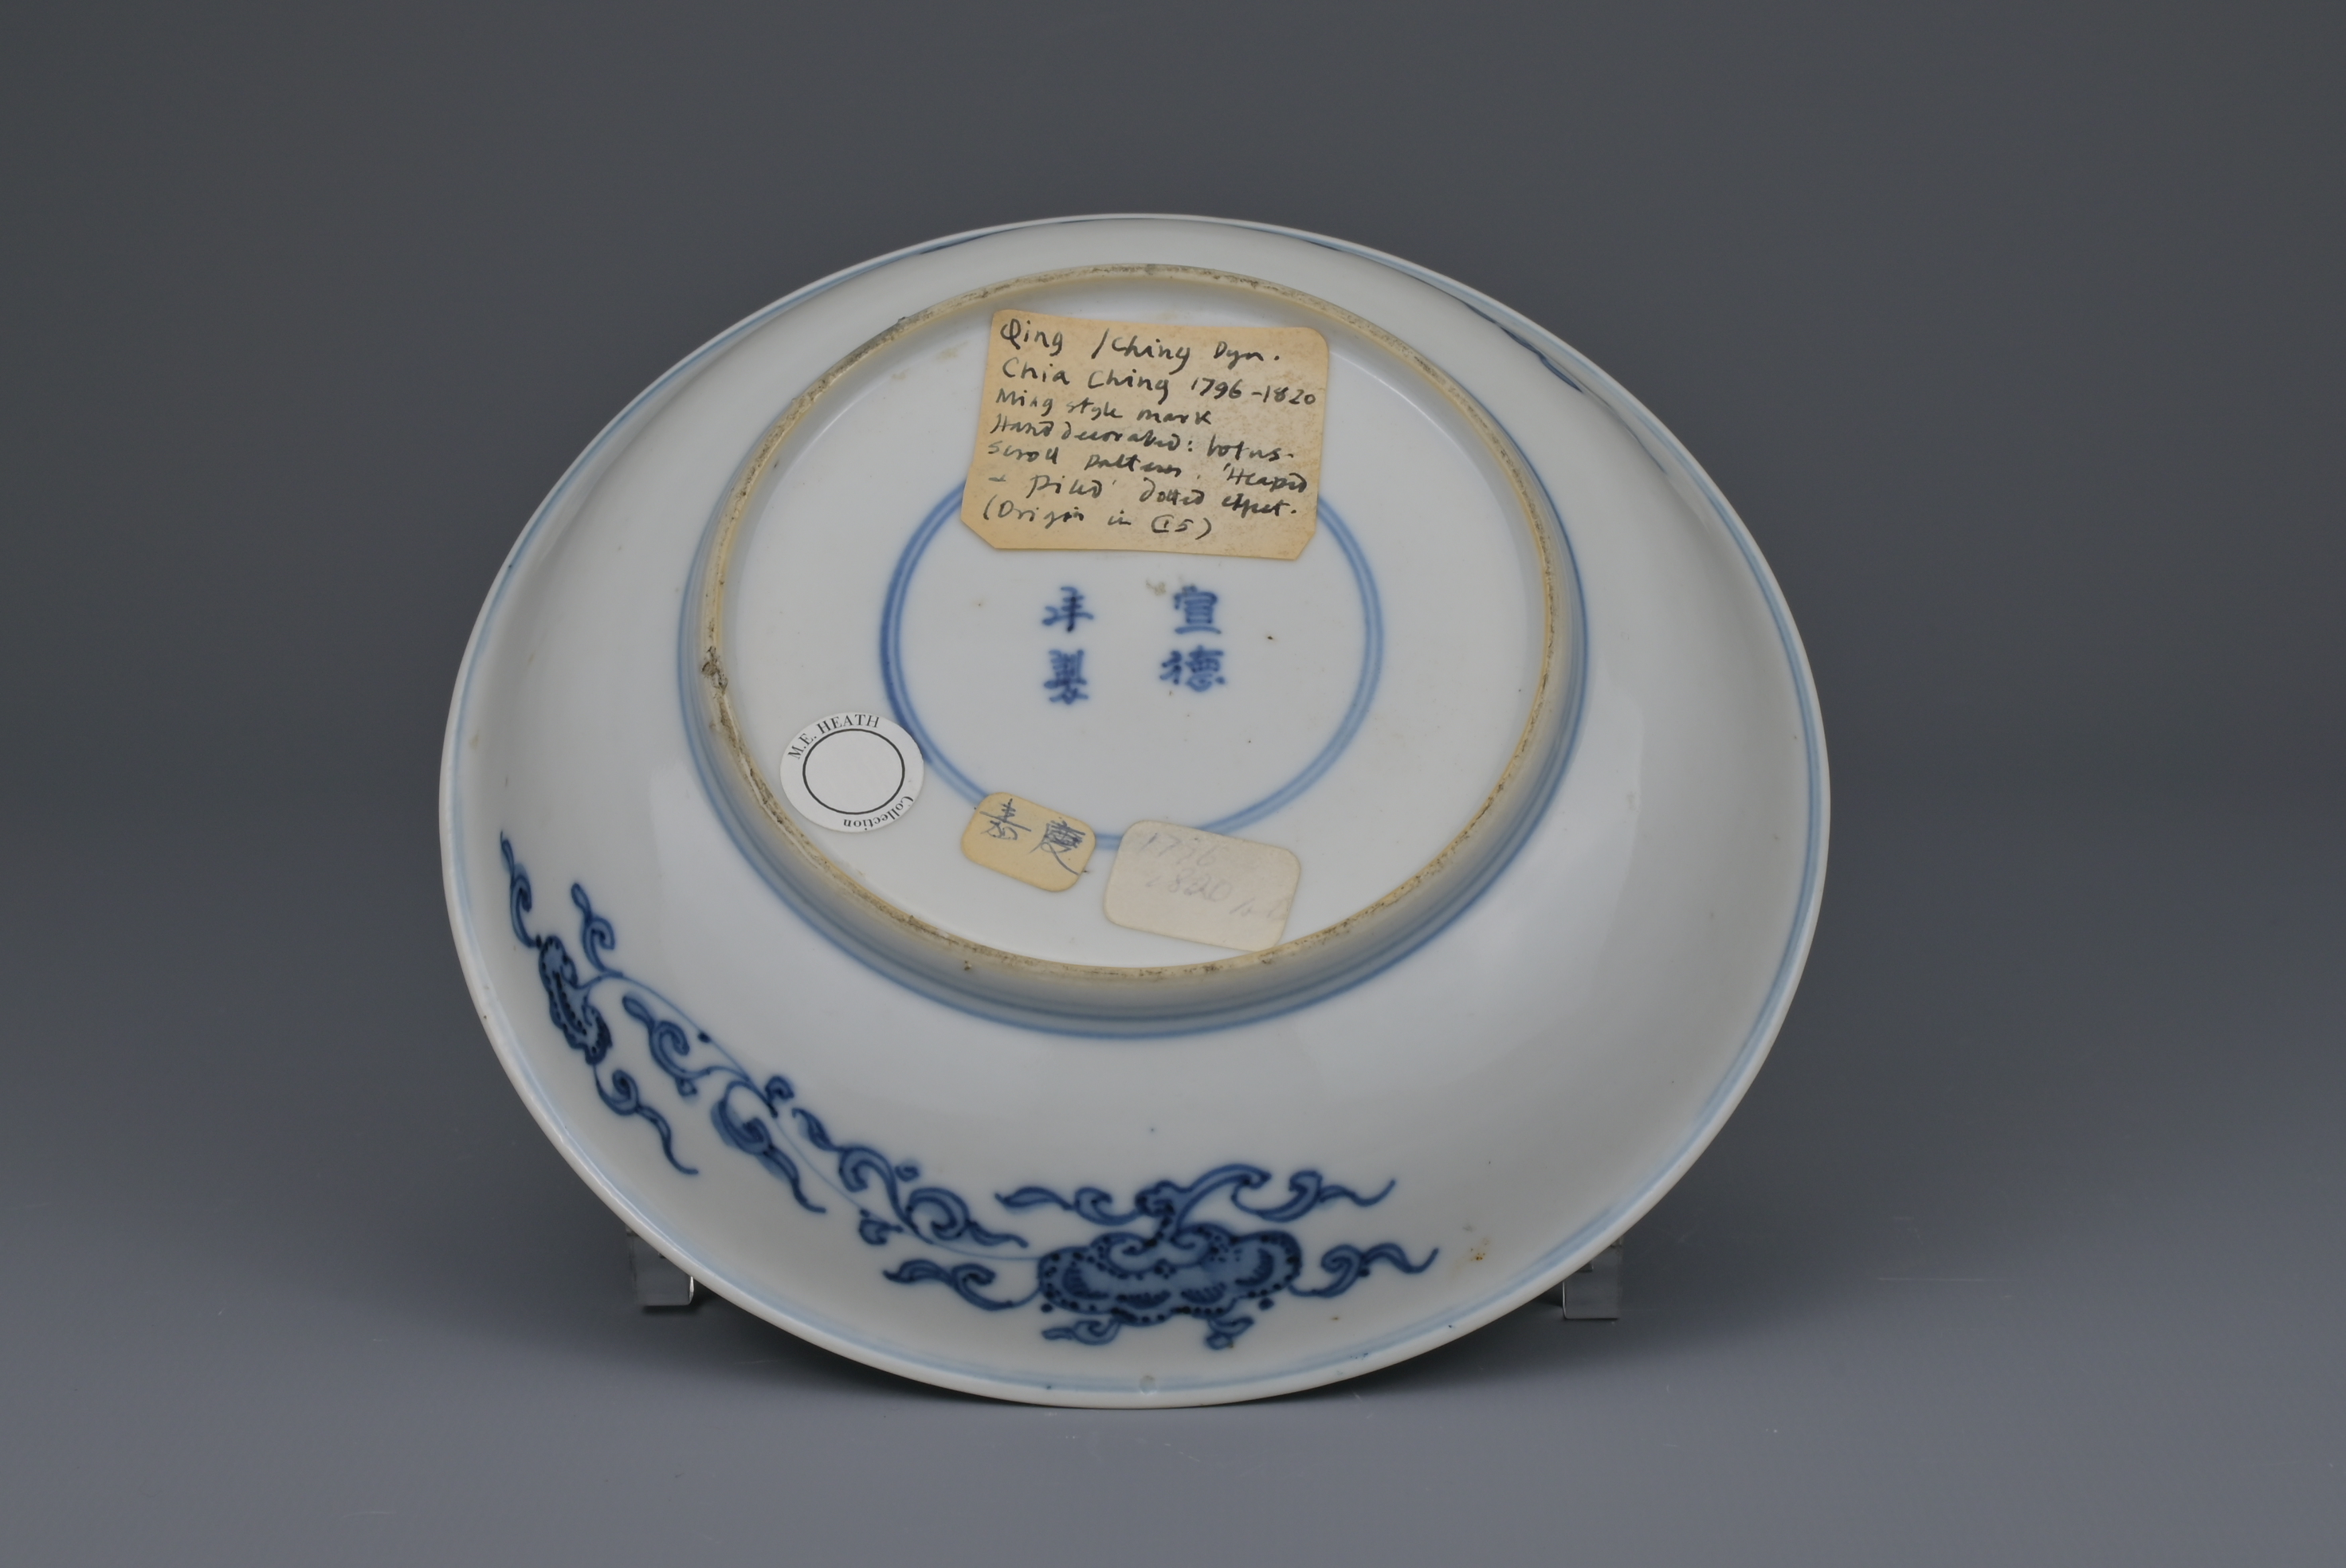 CHINESE BLUE AND WHITE PORCELAIN DISH, JIAQING PERIOD, EARLY 19th CENTURY - Image 6 of 9